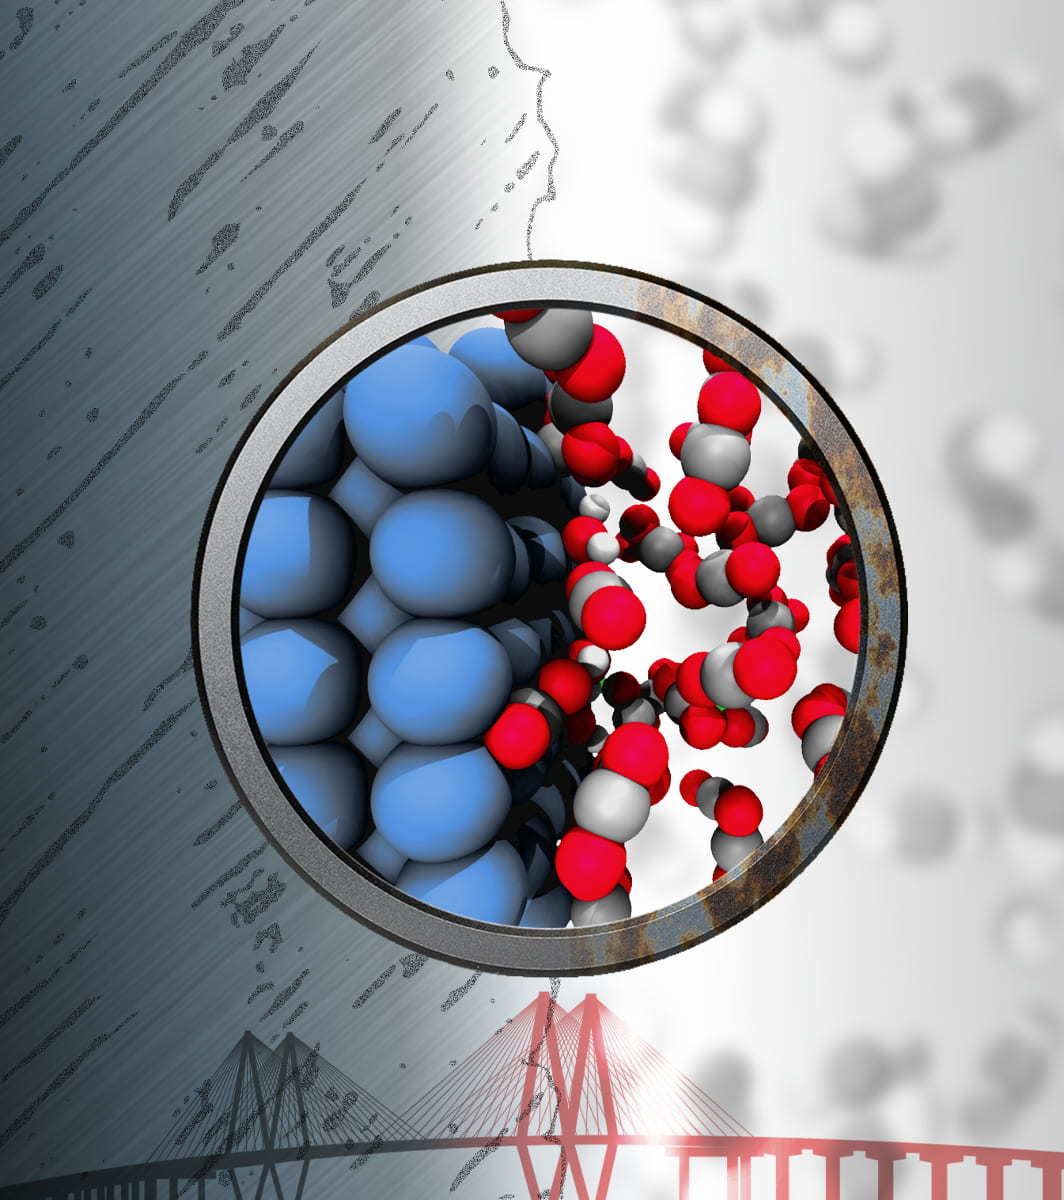 Iron (blue) can react with trace amounts of water to produce corrosive chemicals despite being bathed in “inert” supercritical fluids of carbon dioxide. Atomistic simulations carried out at Rice University show how this reaction happens. (Credit: Evgeni Penev/Rice University)